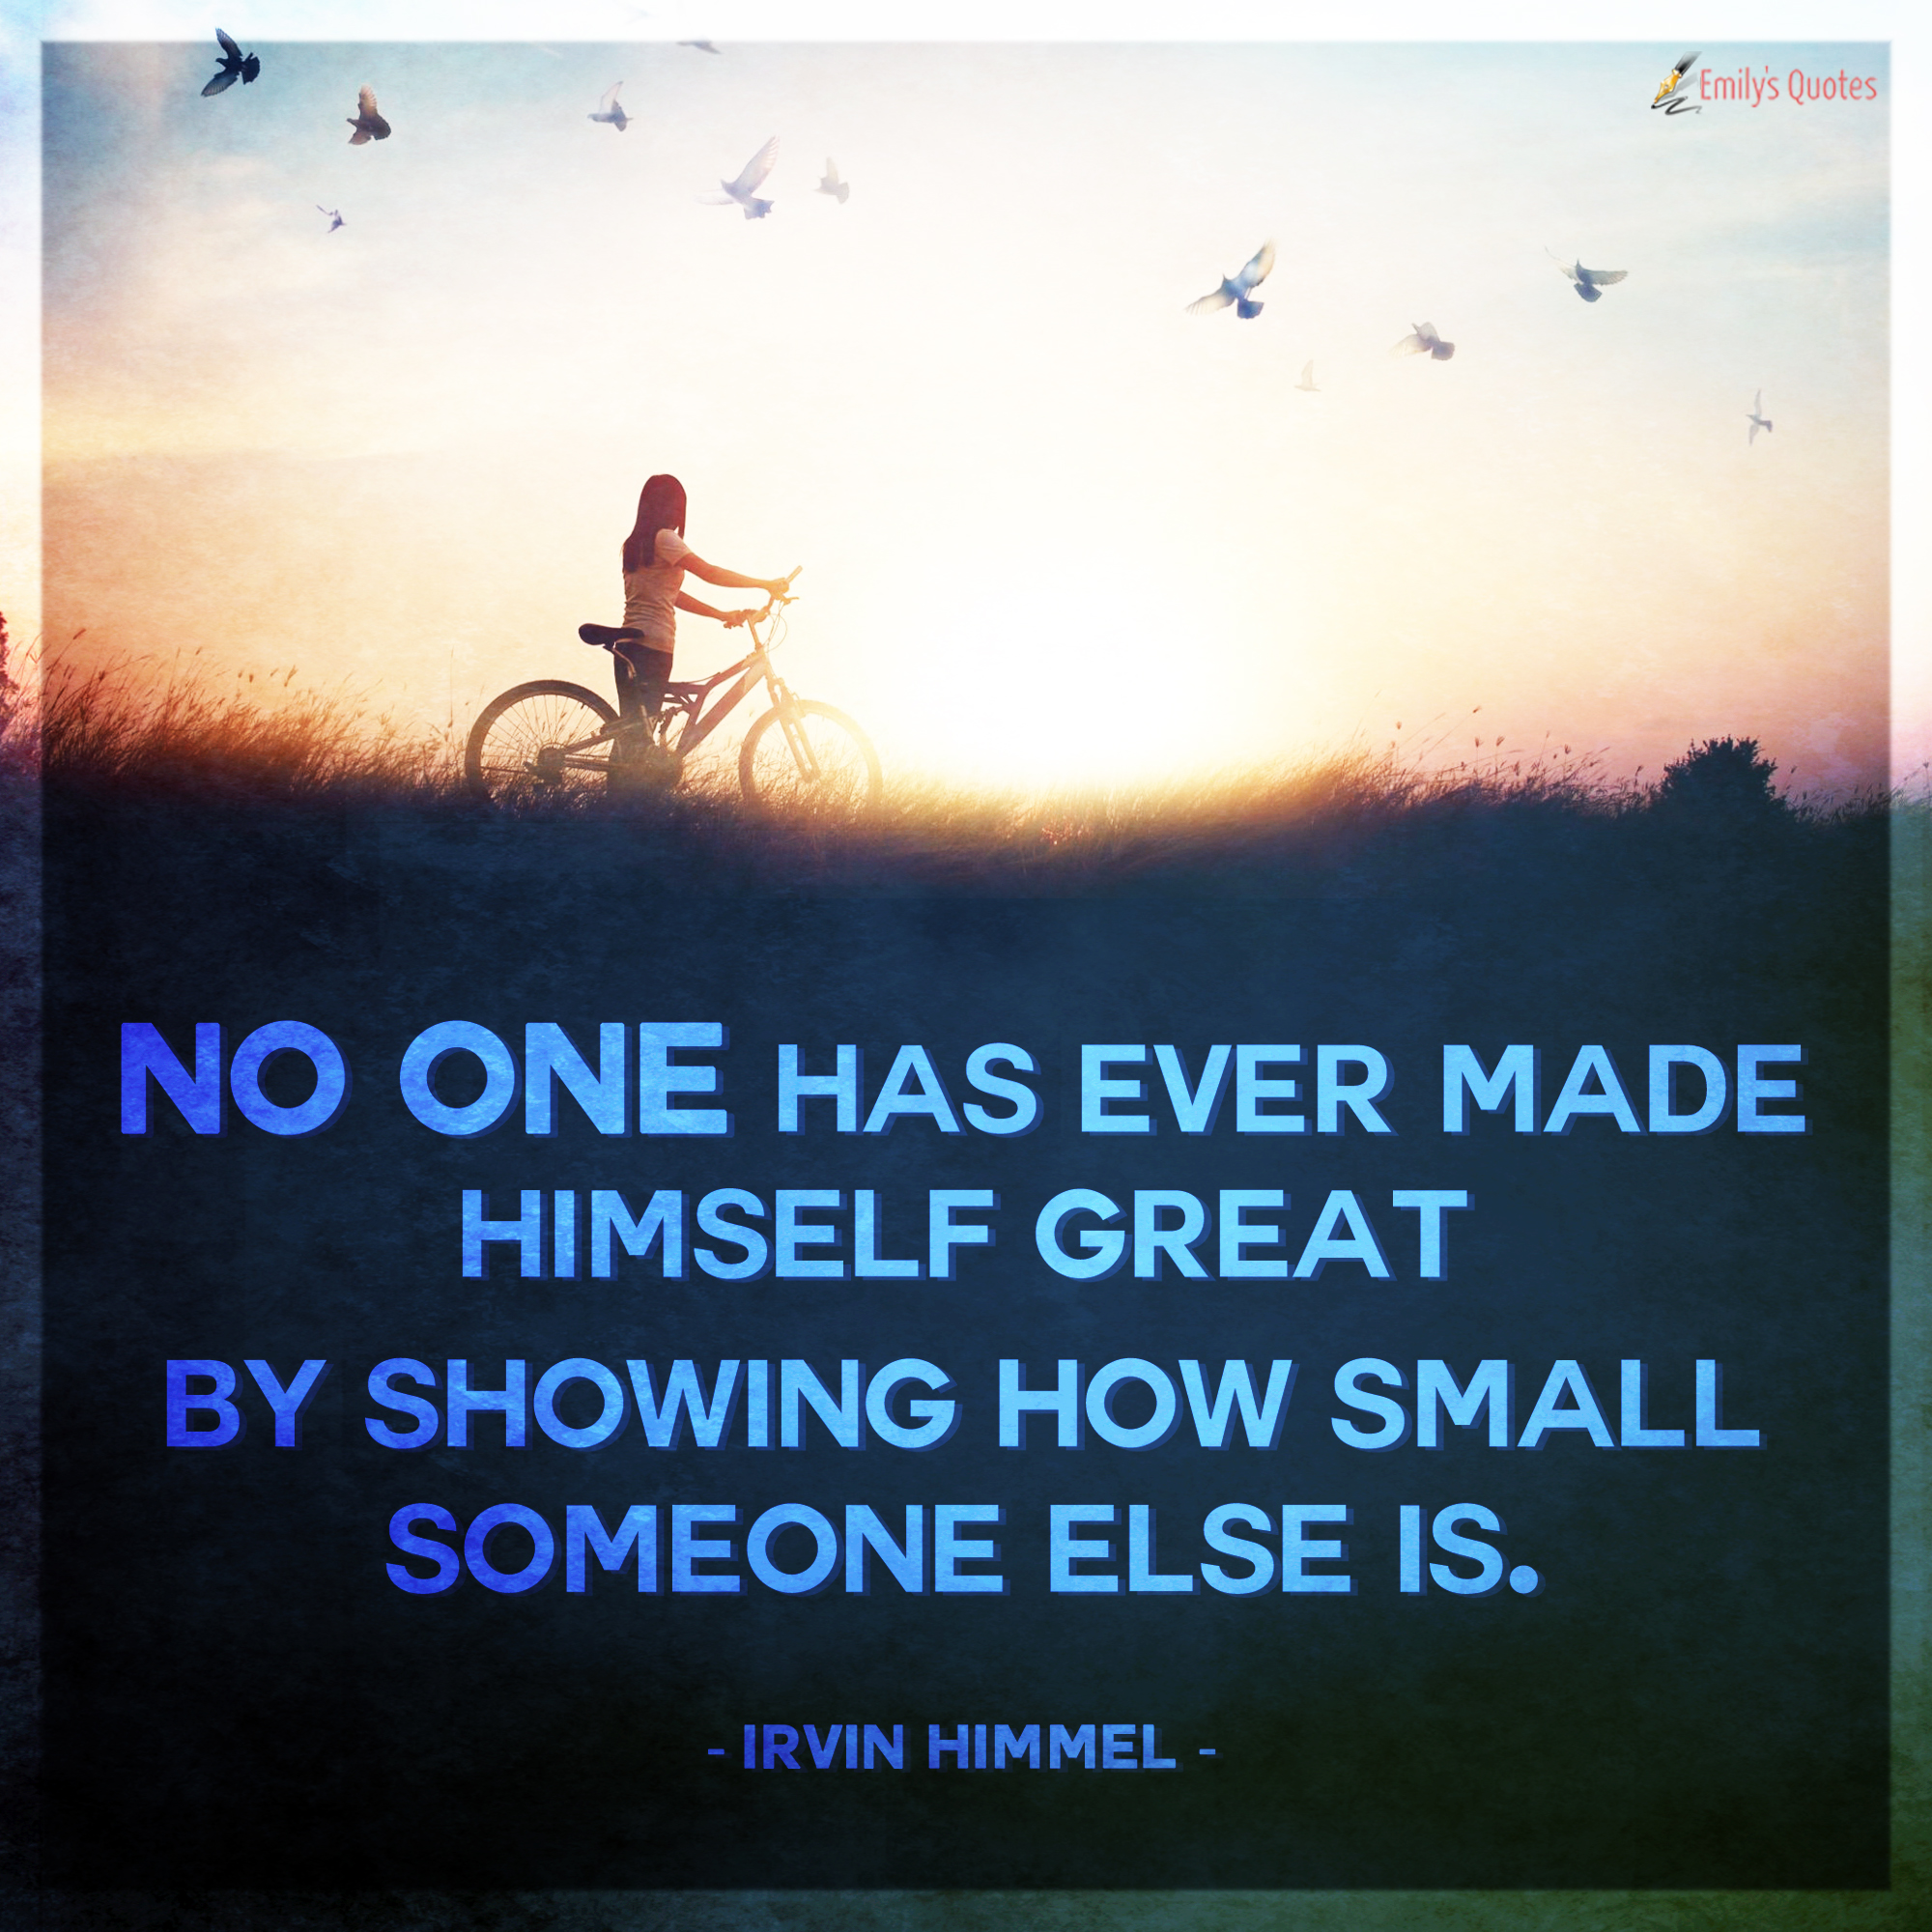 No one has ever made himself great by showing how small someone else is